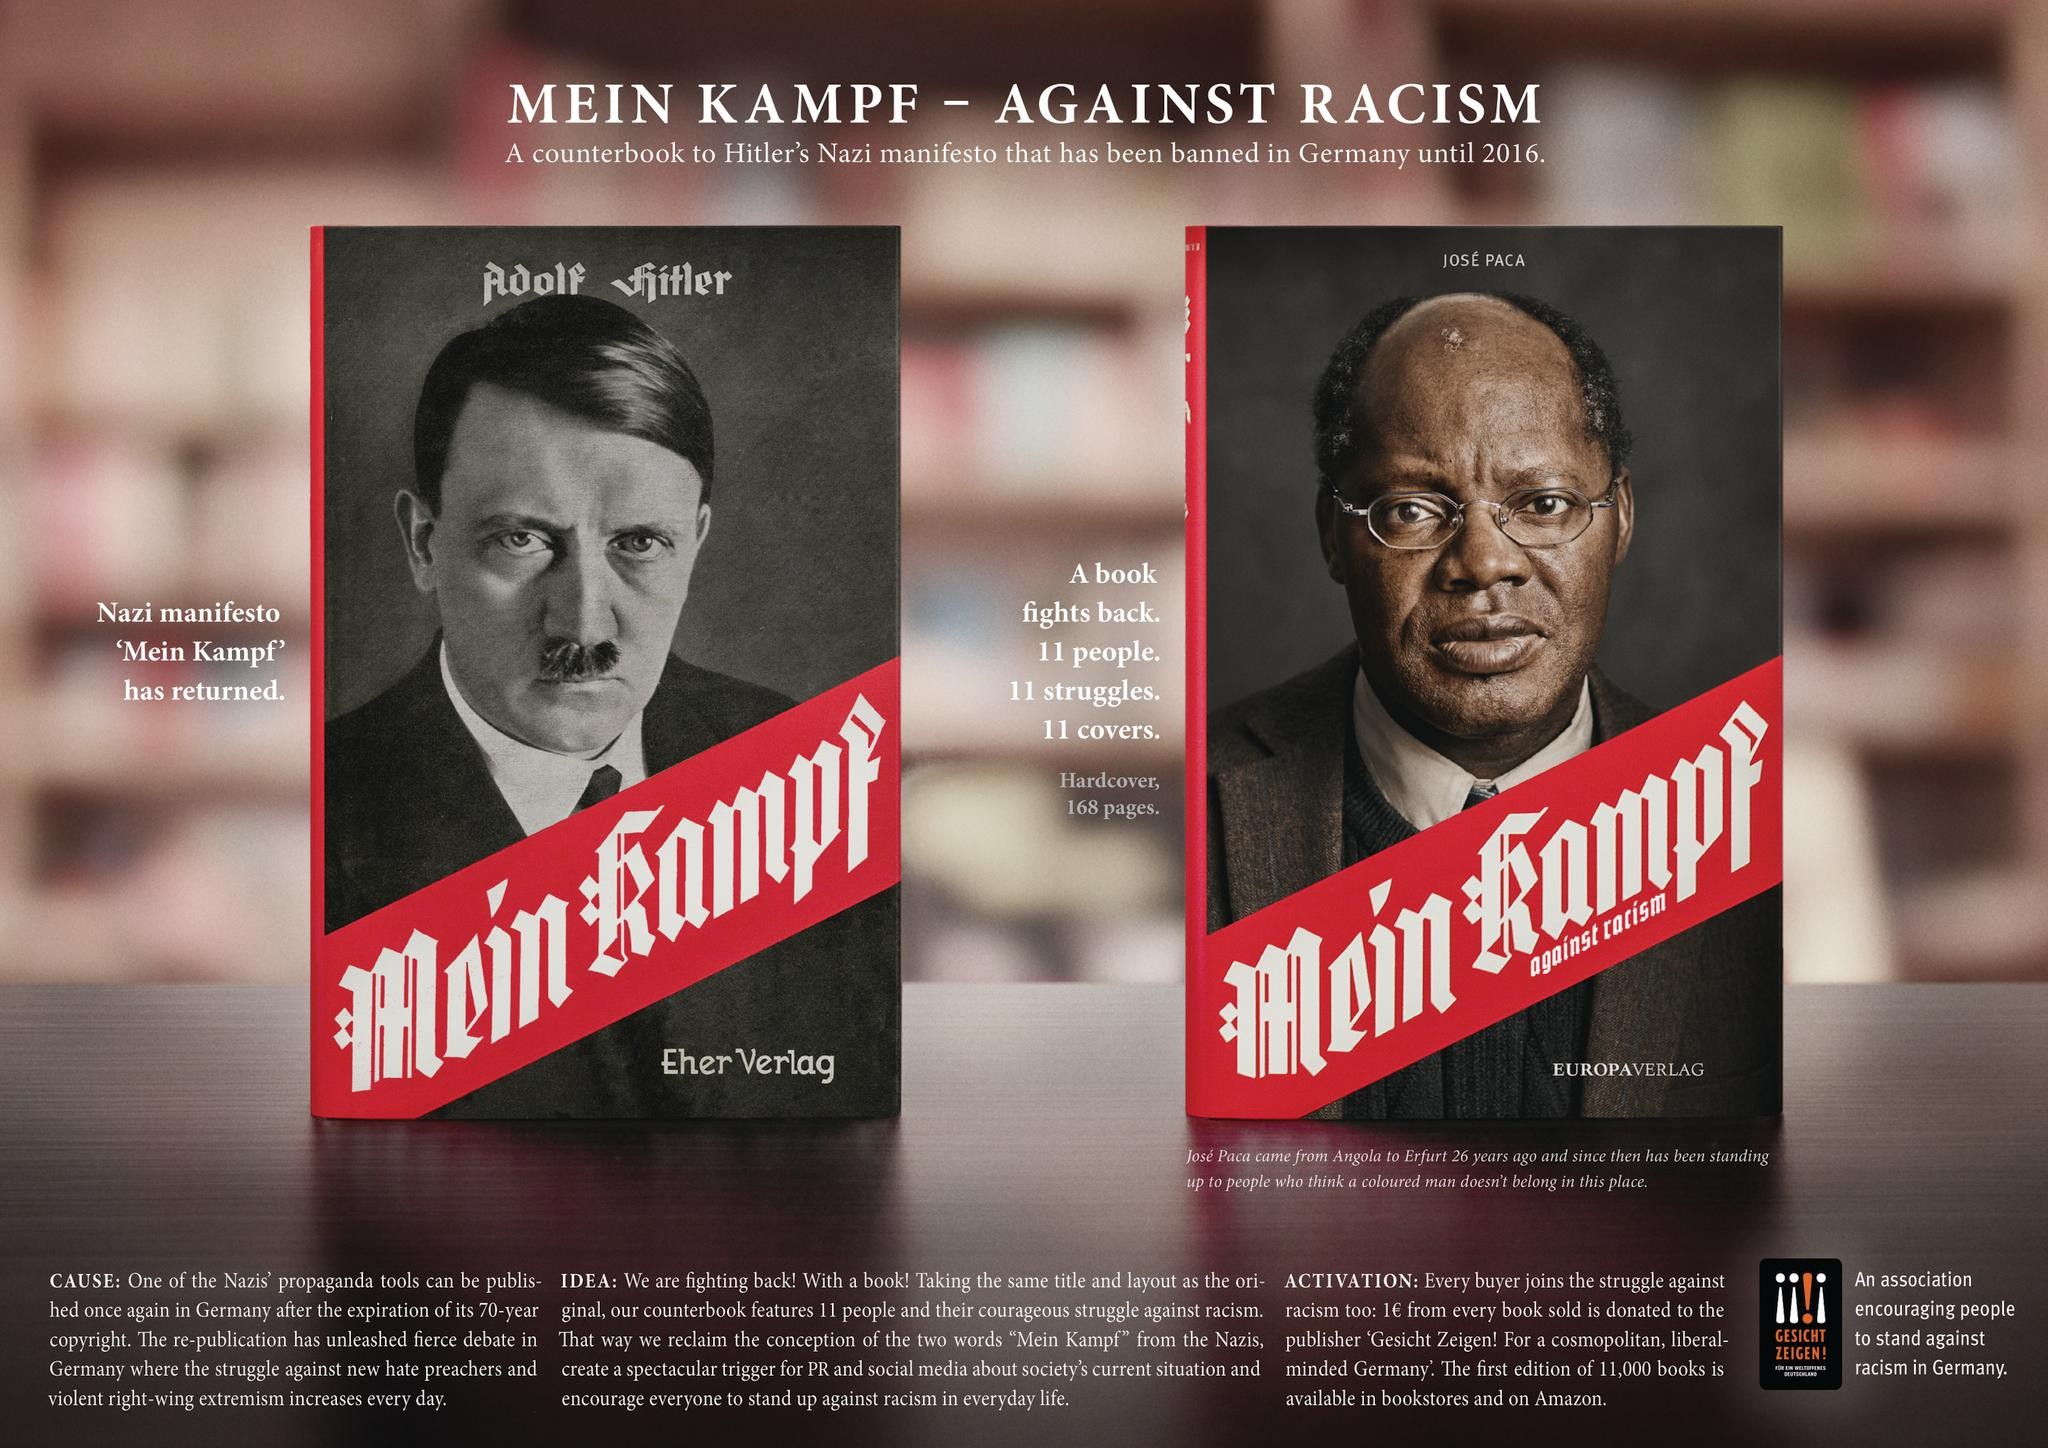 MEIN KAMPF – AGAINST RACISM